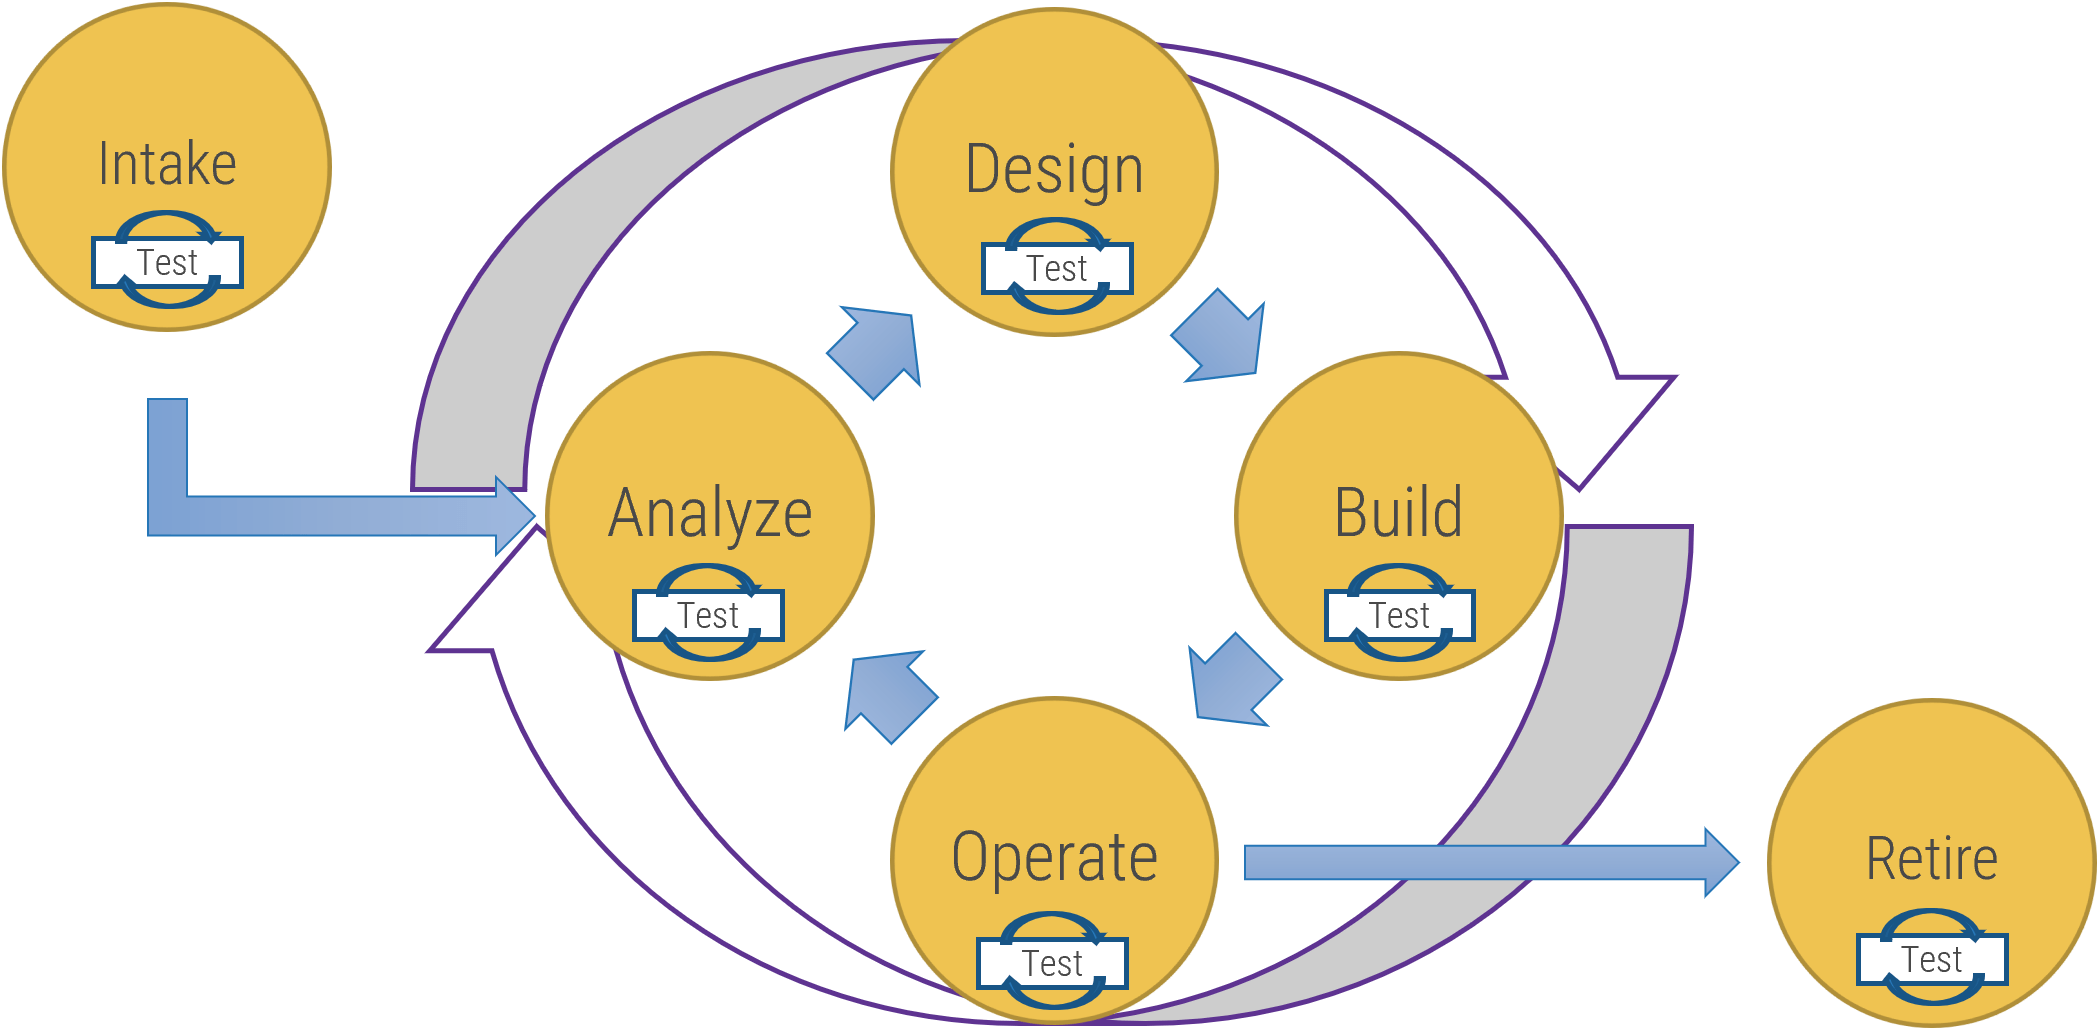 The Solution Delivery Lifecycle seen as a cycle. 'Intake' feeds into the cycle to 'Analyze', 'Design', 'Build', and 'Operate', and then leaving the cycle is 'Retire'. Each step has a 'Test' cycle.